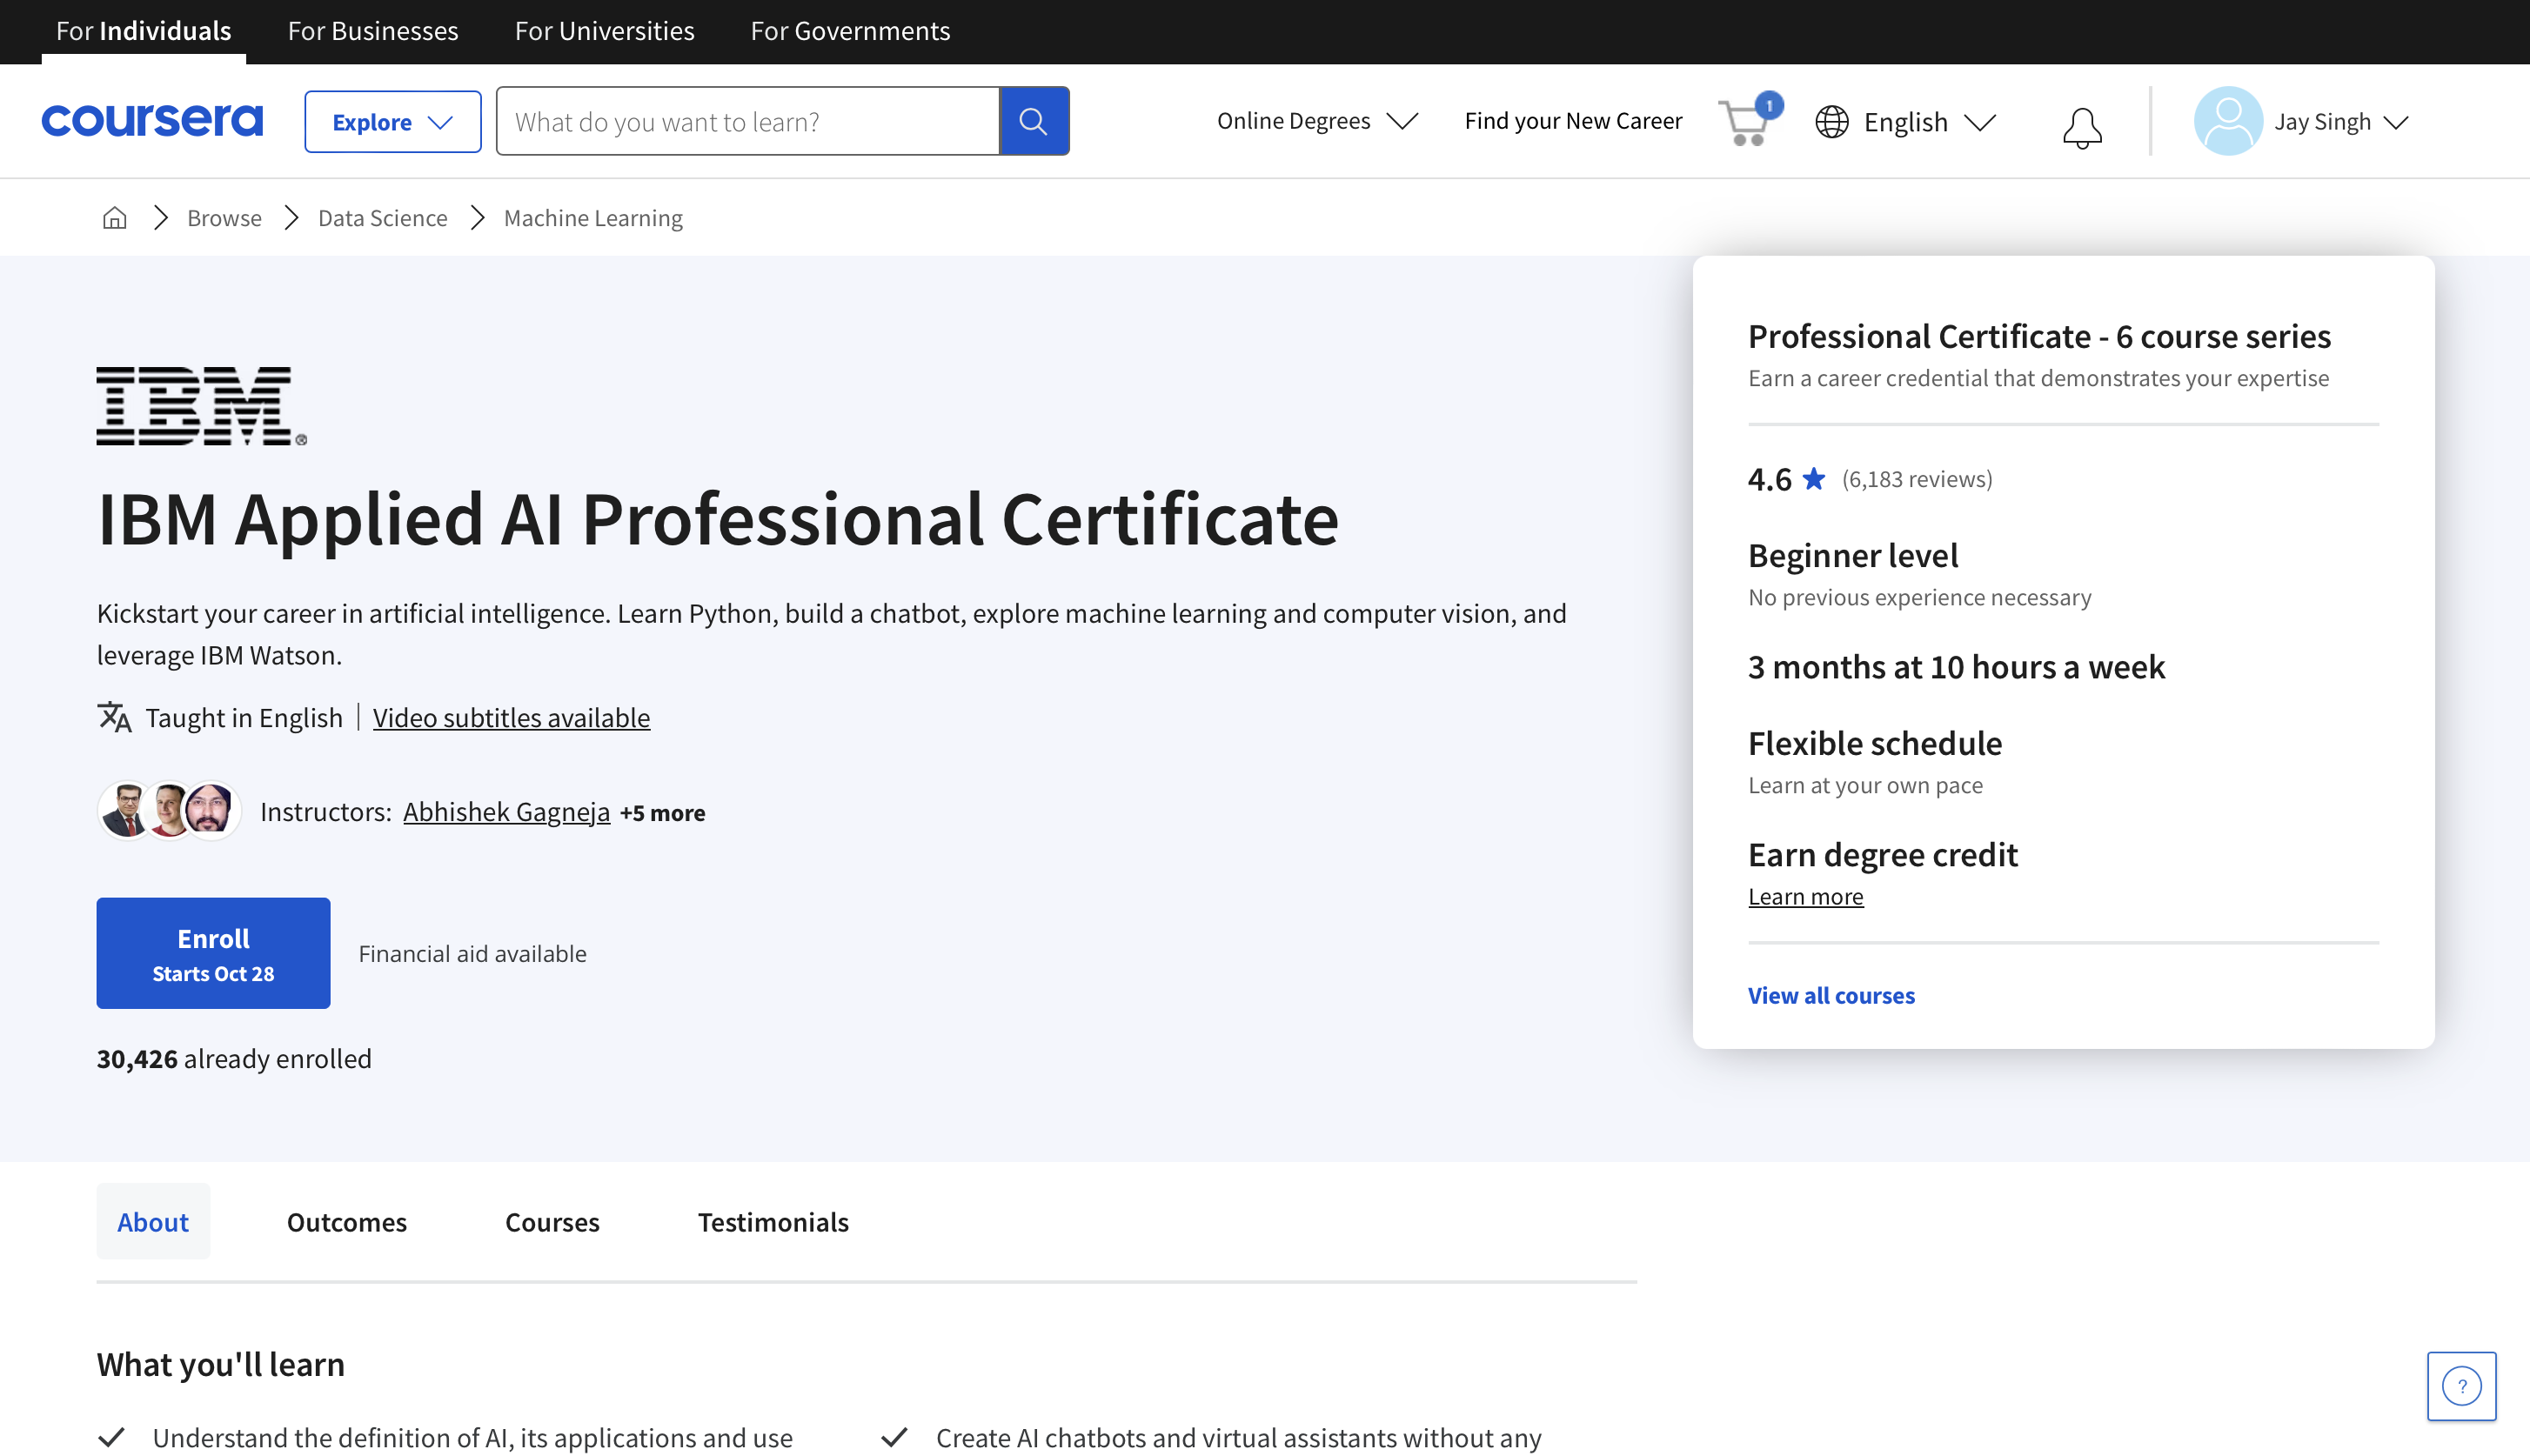 IBM Applied AI Professional Certificate